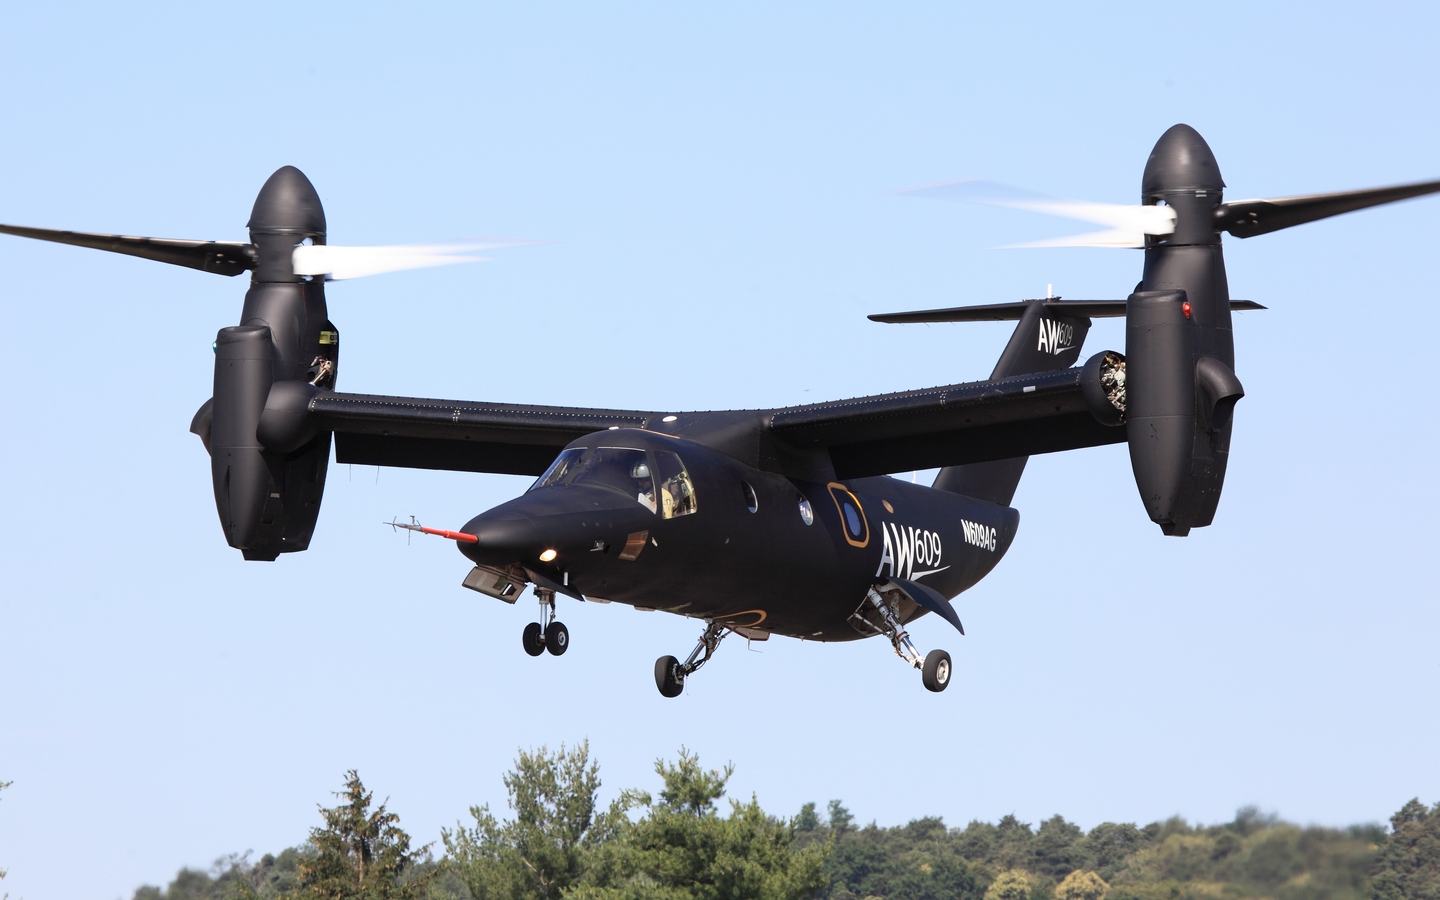 Italy Armed Forces thread: AW609